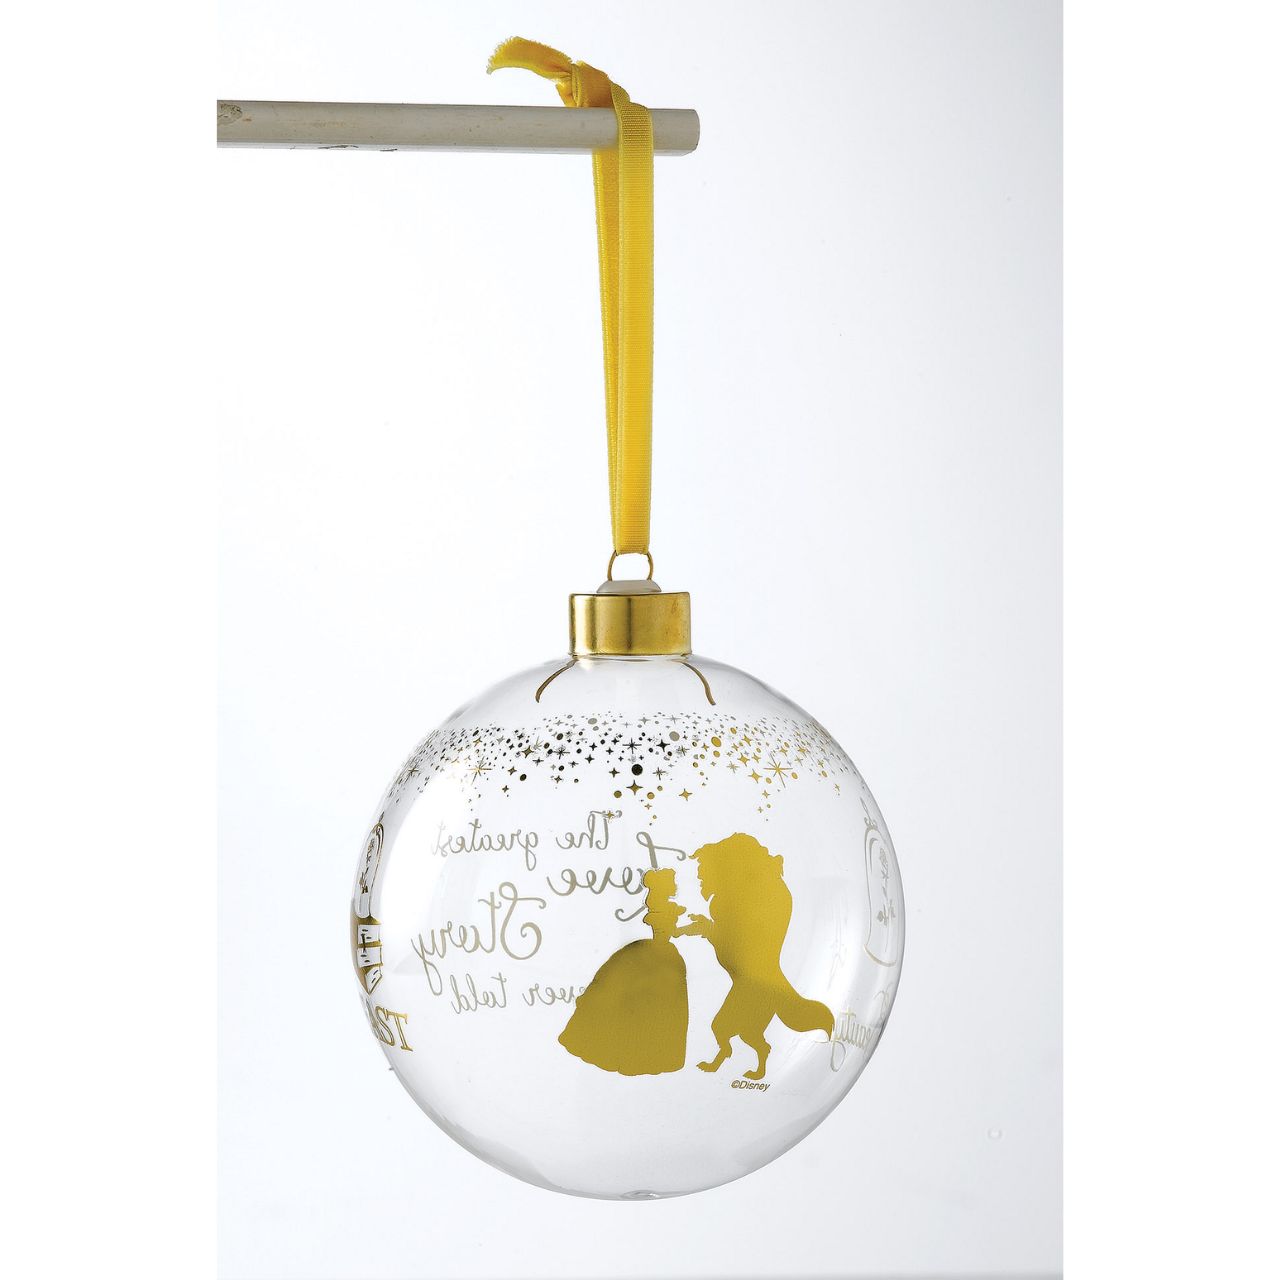 Belle Wedding Bauble  This glass Beauty and the Beast bauble is the perfect gift to remind the happy couple of their love story. The bauble is strung with gold ribbon and is presented in a Disney branded gift box. Not a toy or children's product. Intended for adults only.